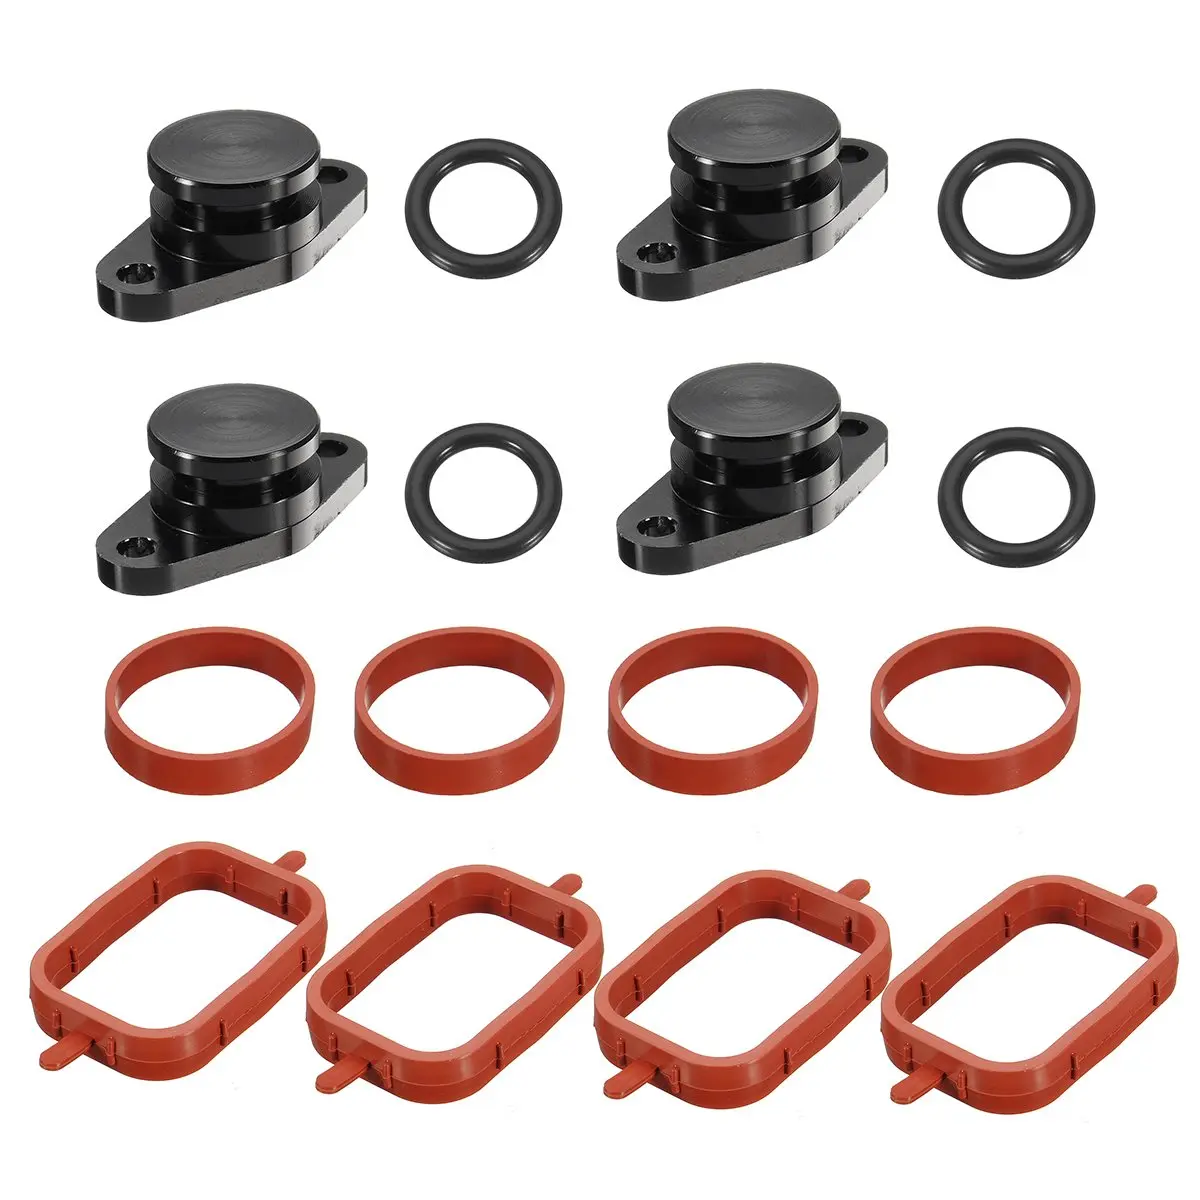 4x 22mm For BMW for Diesel Swirl Flap Blanks Repair With Intake Manifold Gaskets